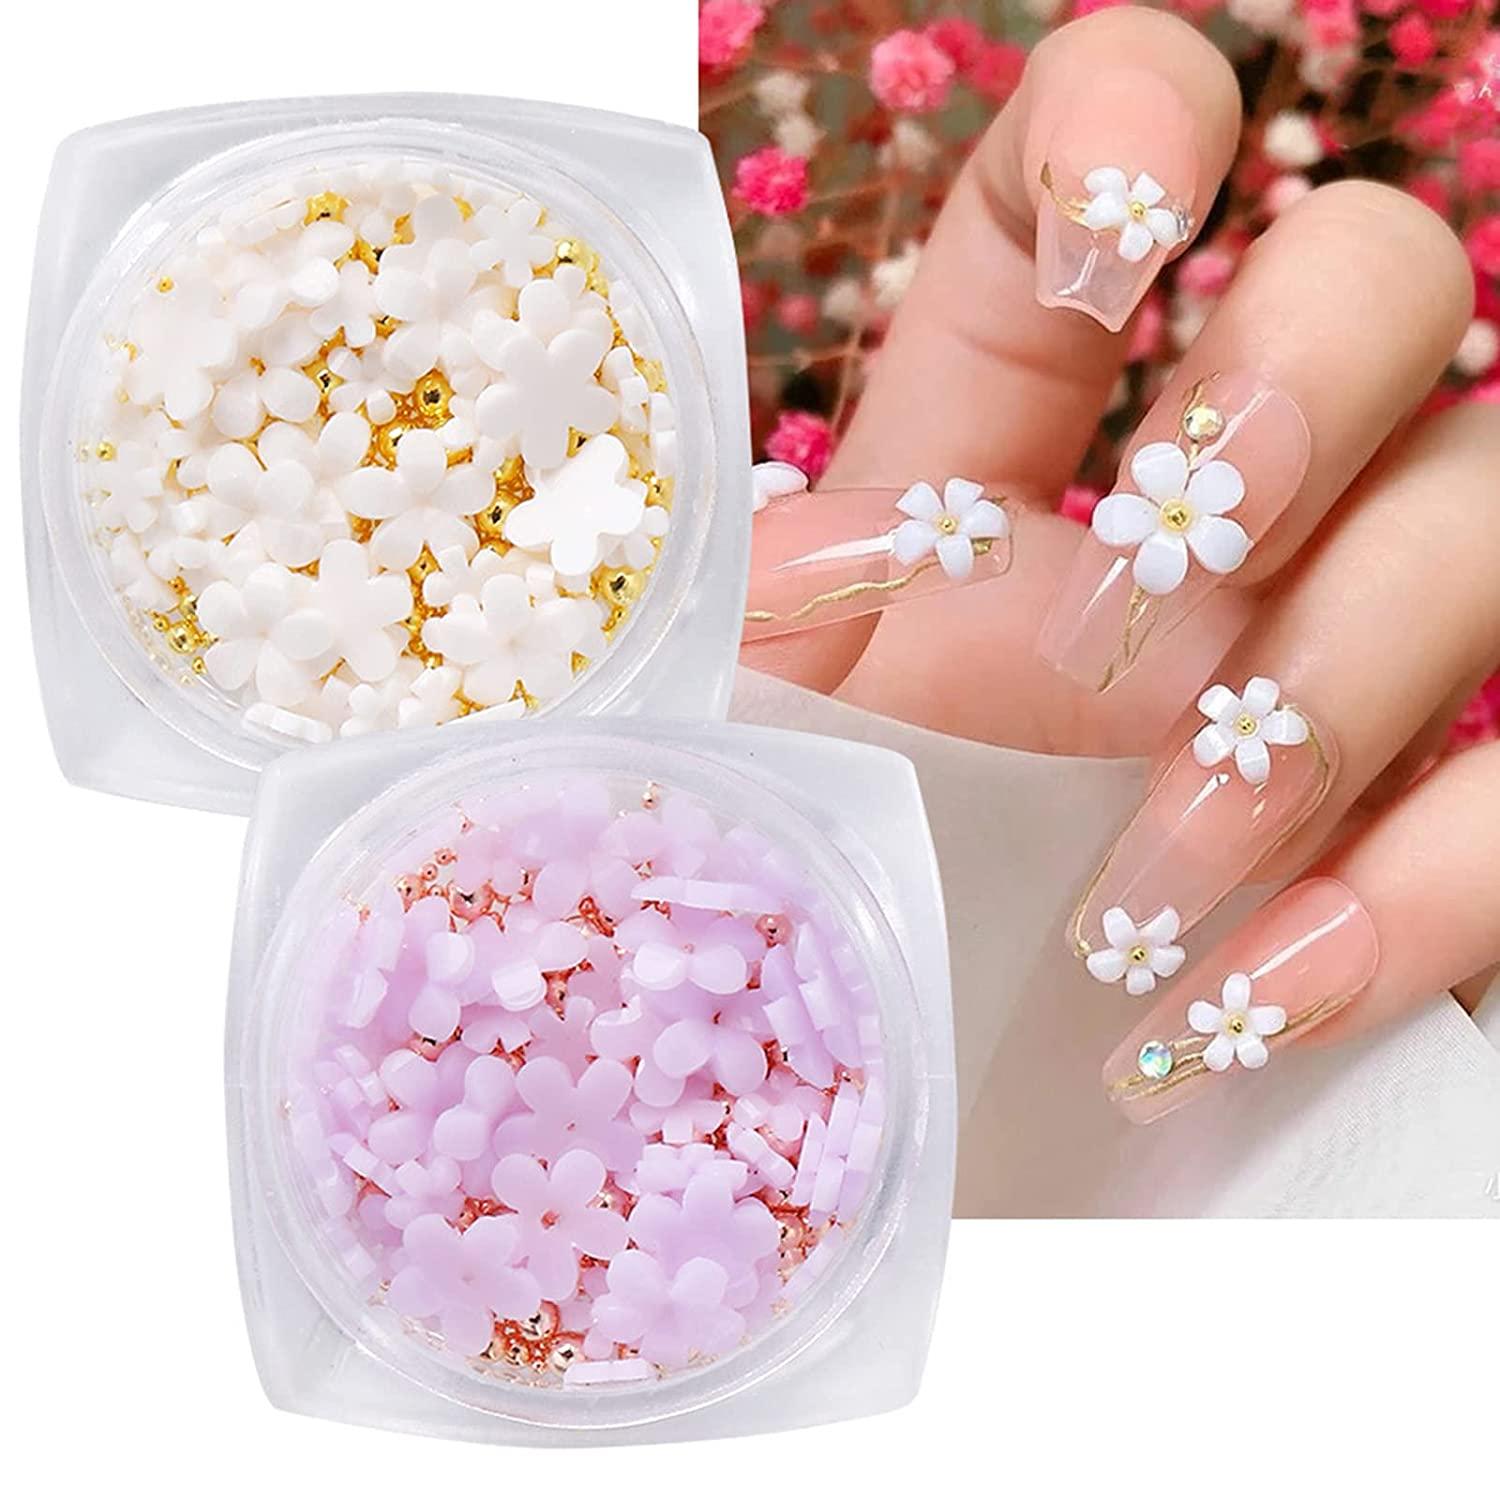 3D Flower Nail Charms and Metal Caviar Beads,Nail Art 3D Acrylic Flowers  Nail Charms Nail Design Supplies Decoration Accessories DIY Nail Decoration